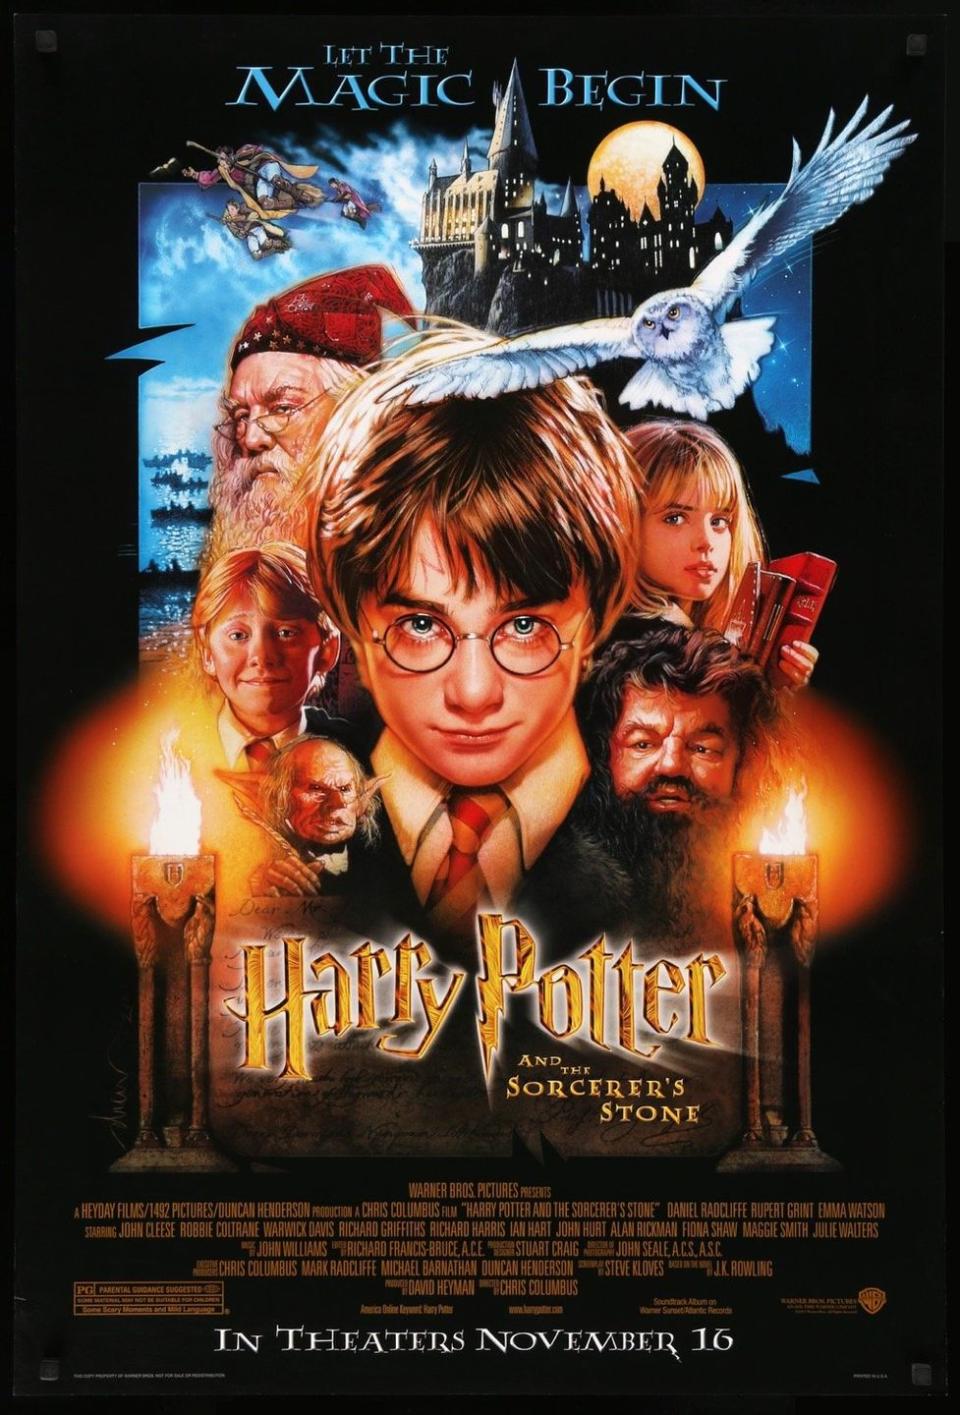 4) Harry Potter and the Sorcerer’s Stone